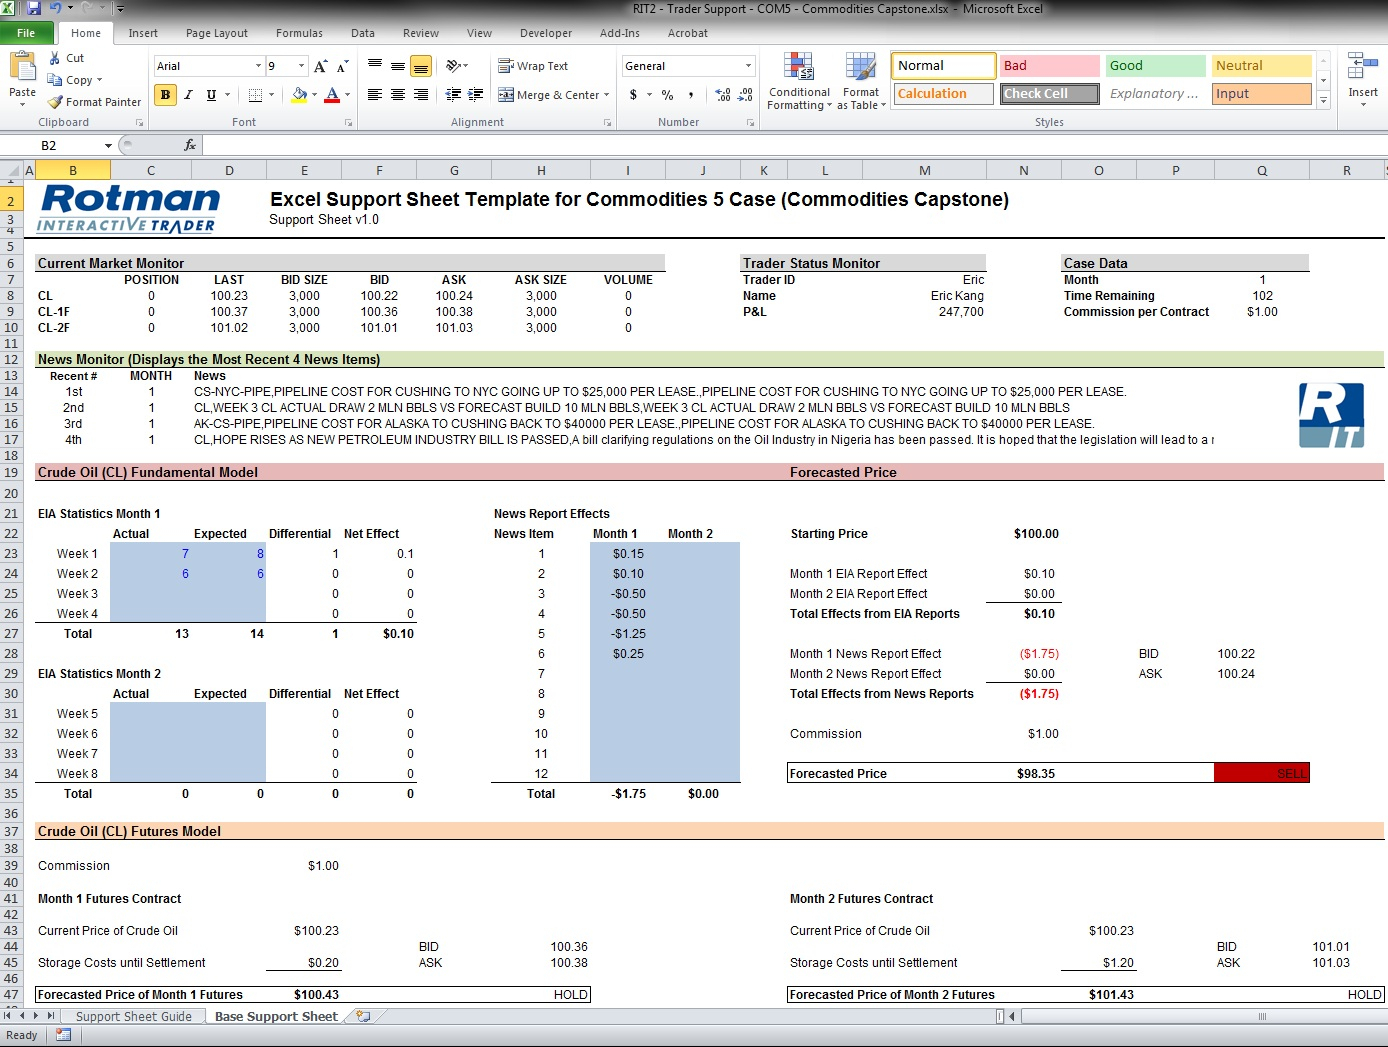 Free Templates Contract Management Excel Spreadsheet In Contract Management Excel Spreadsheet